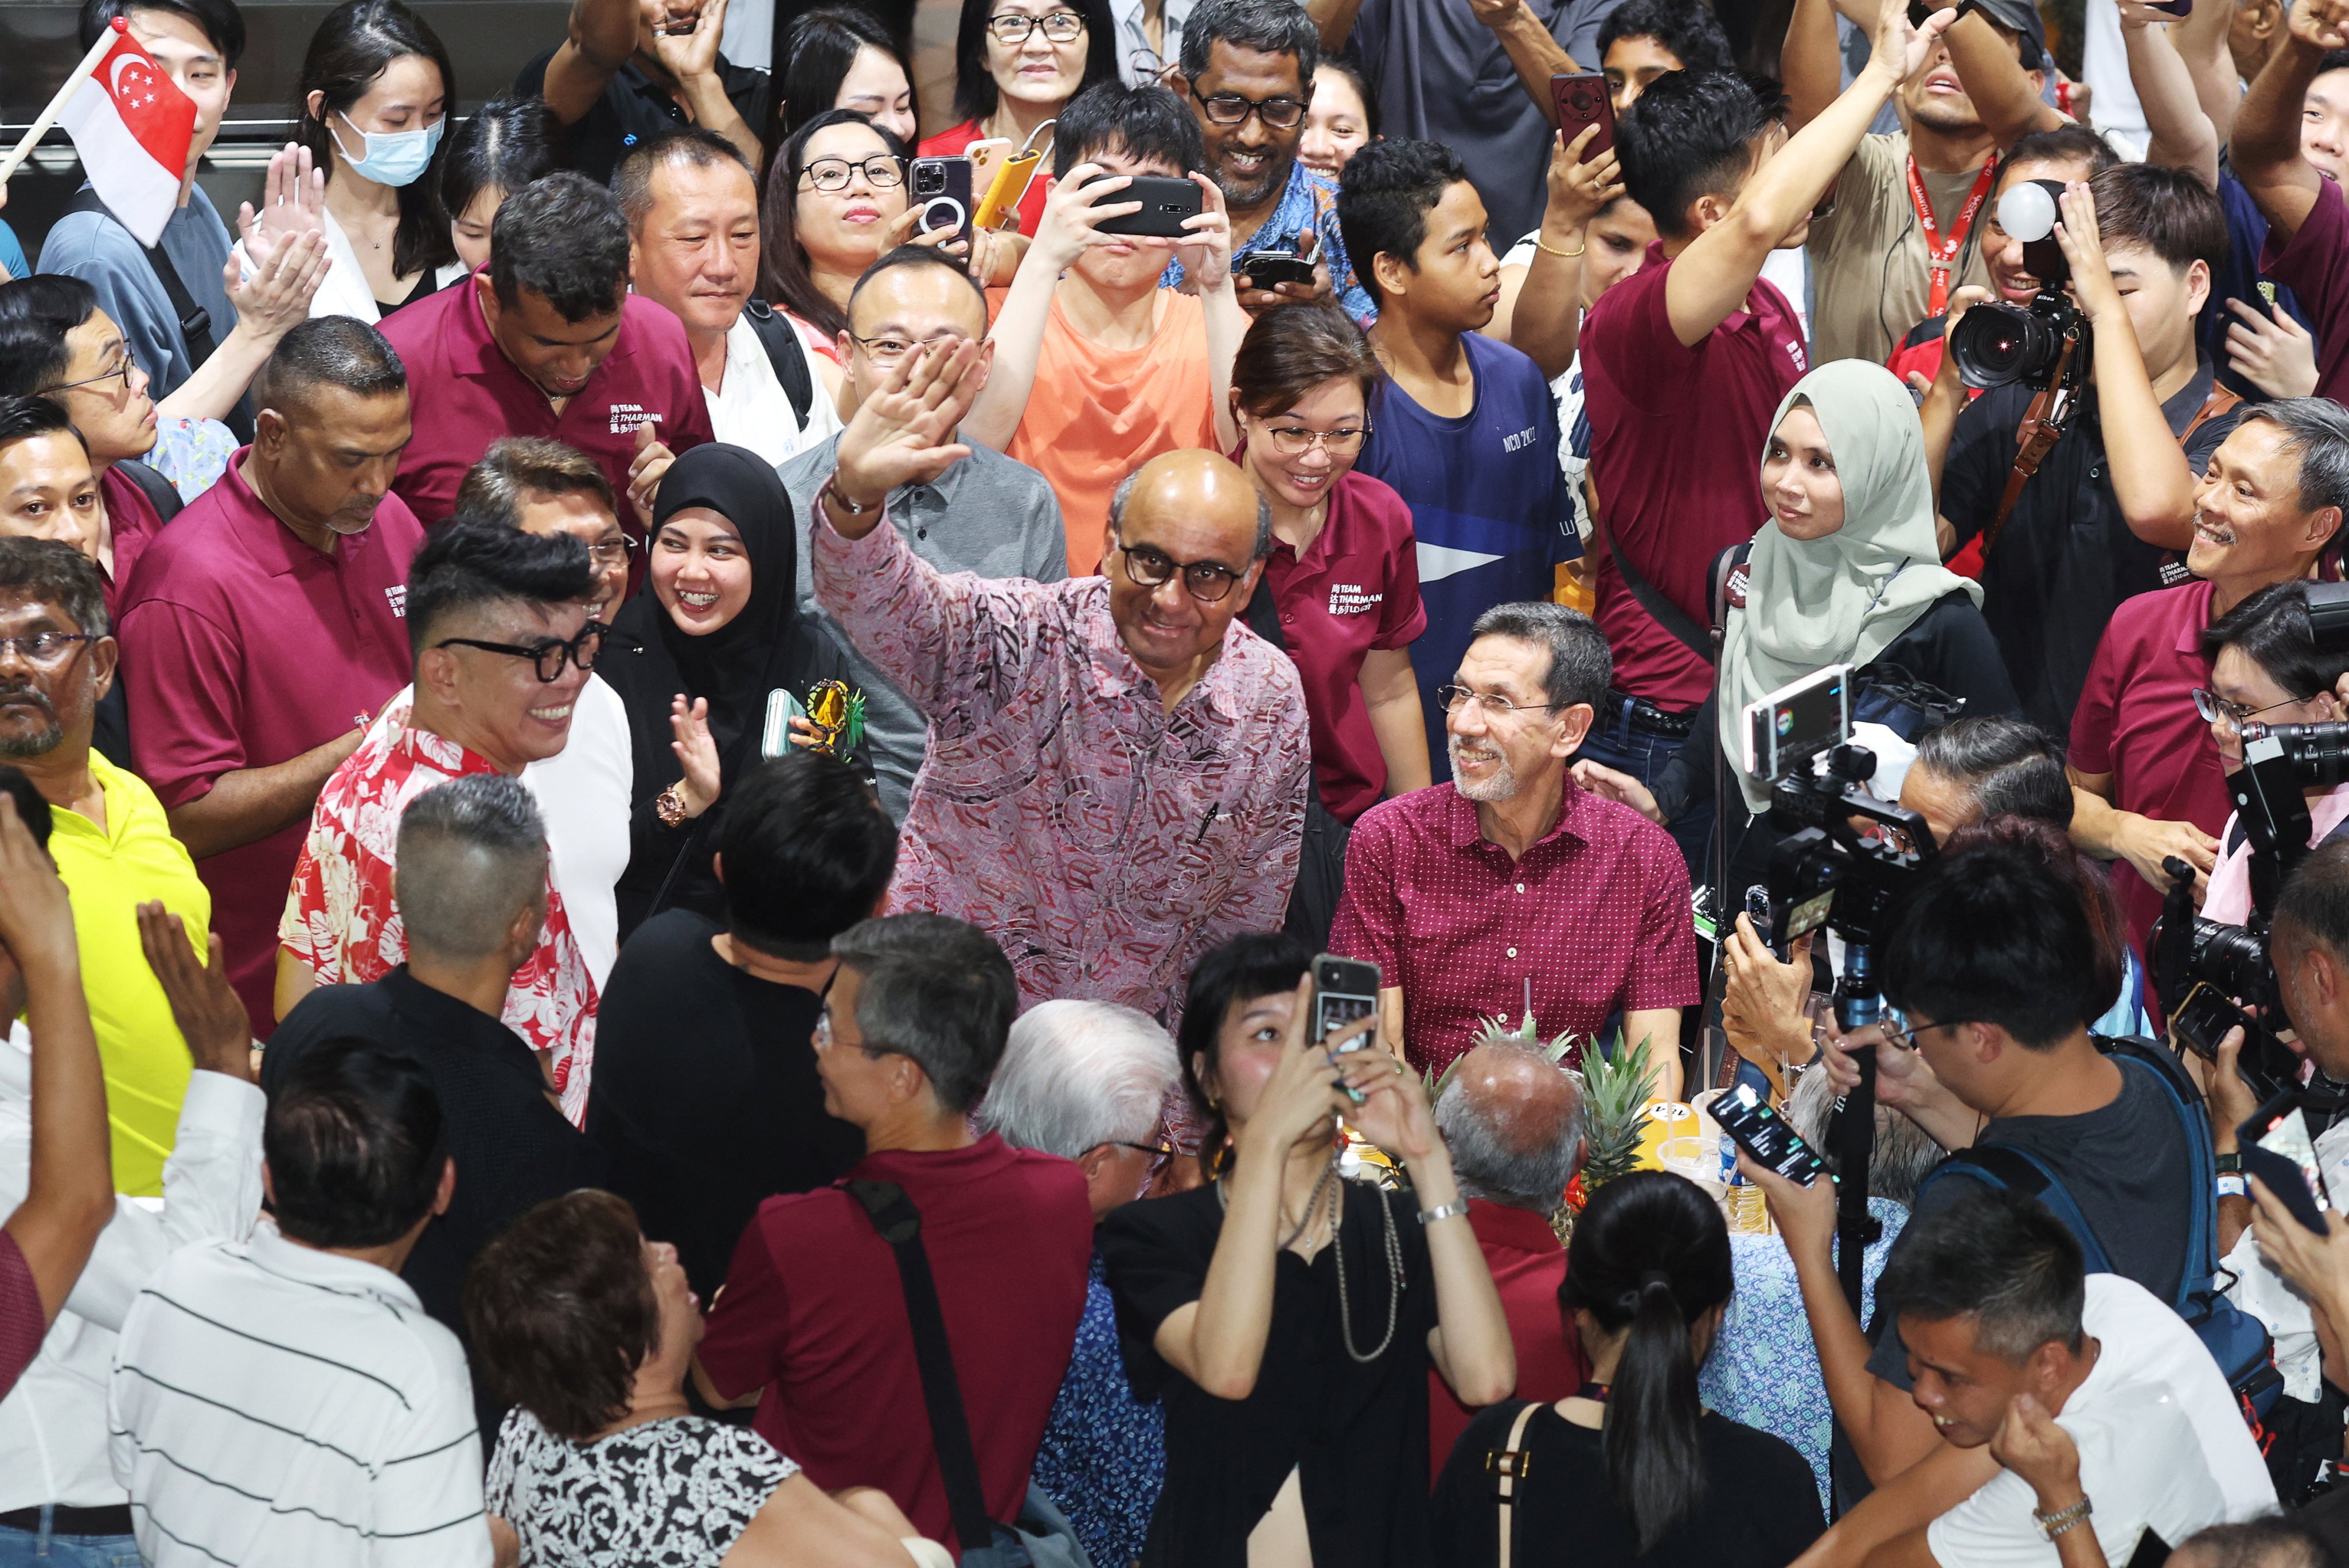 In this issue of the Global Impact newsletter, we look back at the result of the recent Singapore presidential elections that followed a series of political scandals for the ruling People’s Action Party. Photo: Reuters